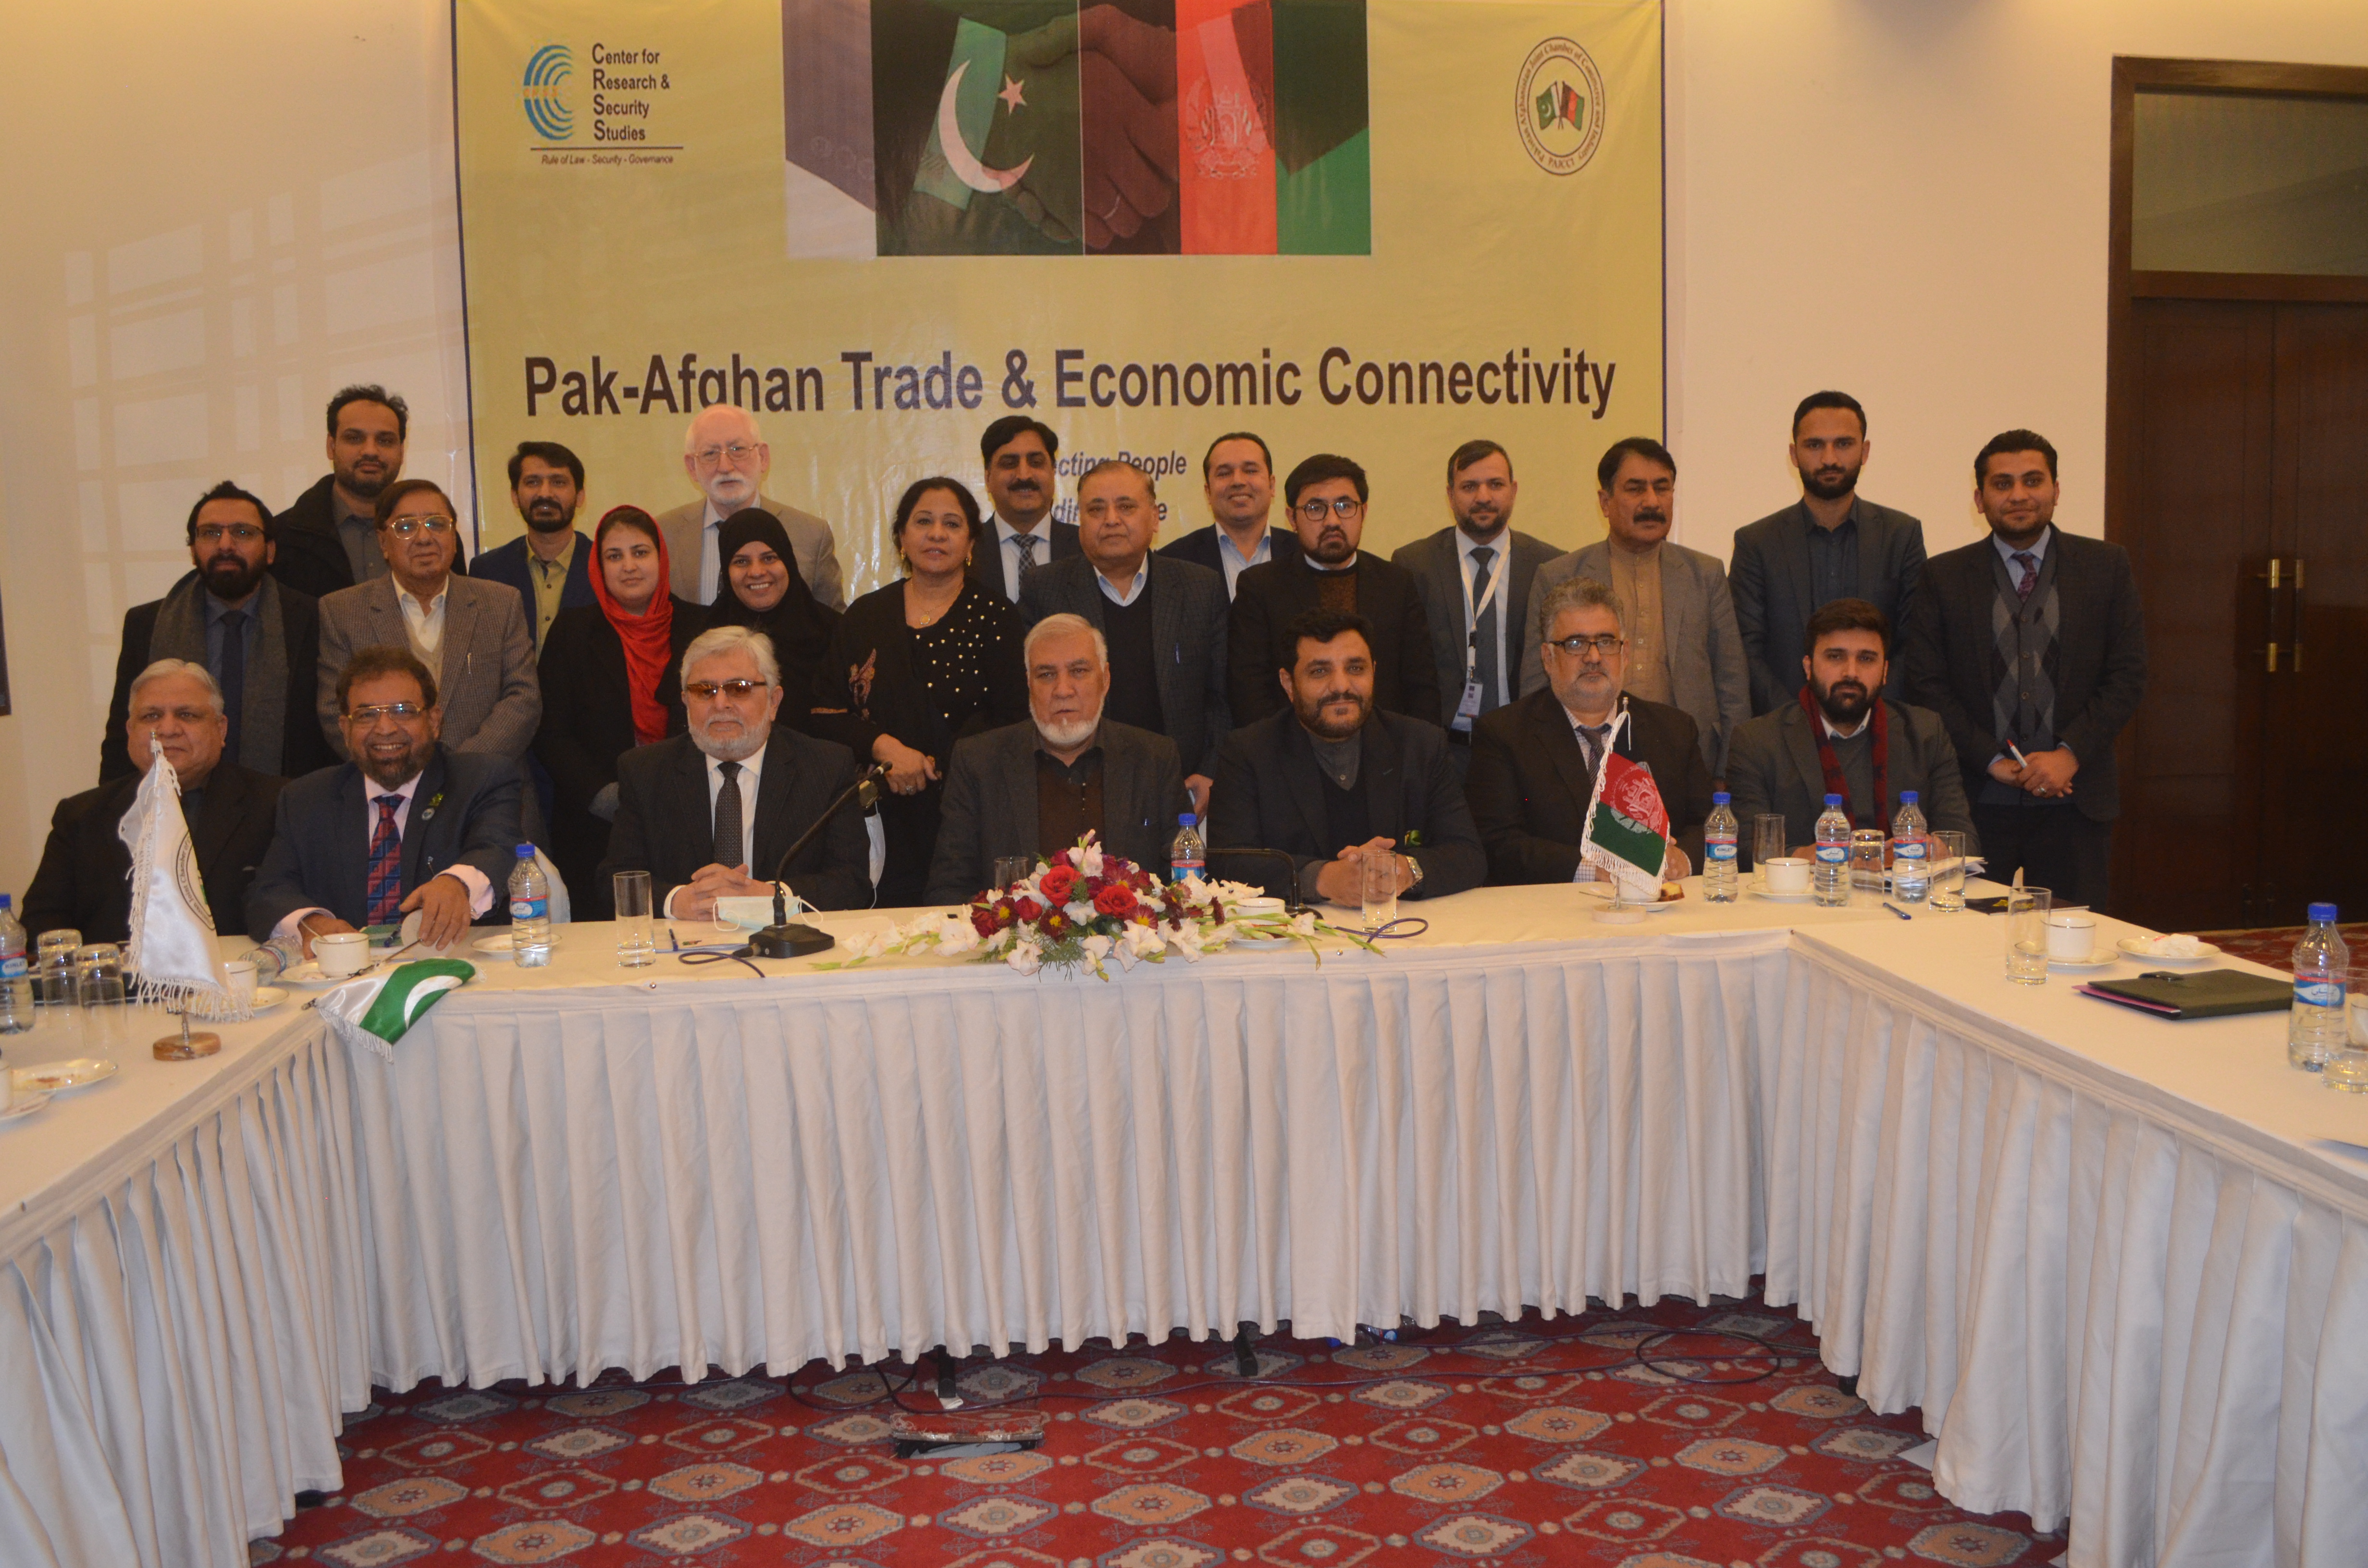  4th Focus Group Discussion on Pak-Afghan Trade & Economic Connectivity in Kabul, Afghanistan - November 24, 2020